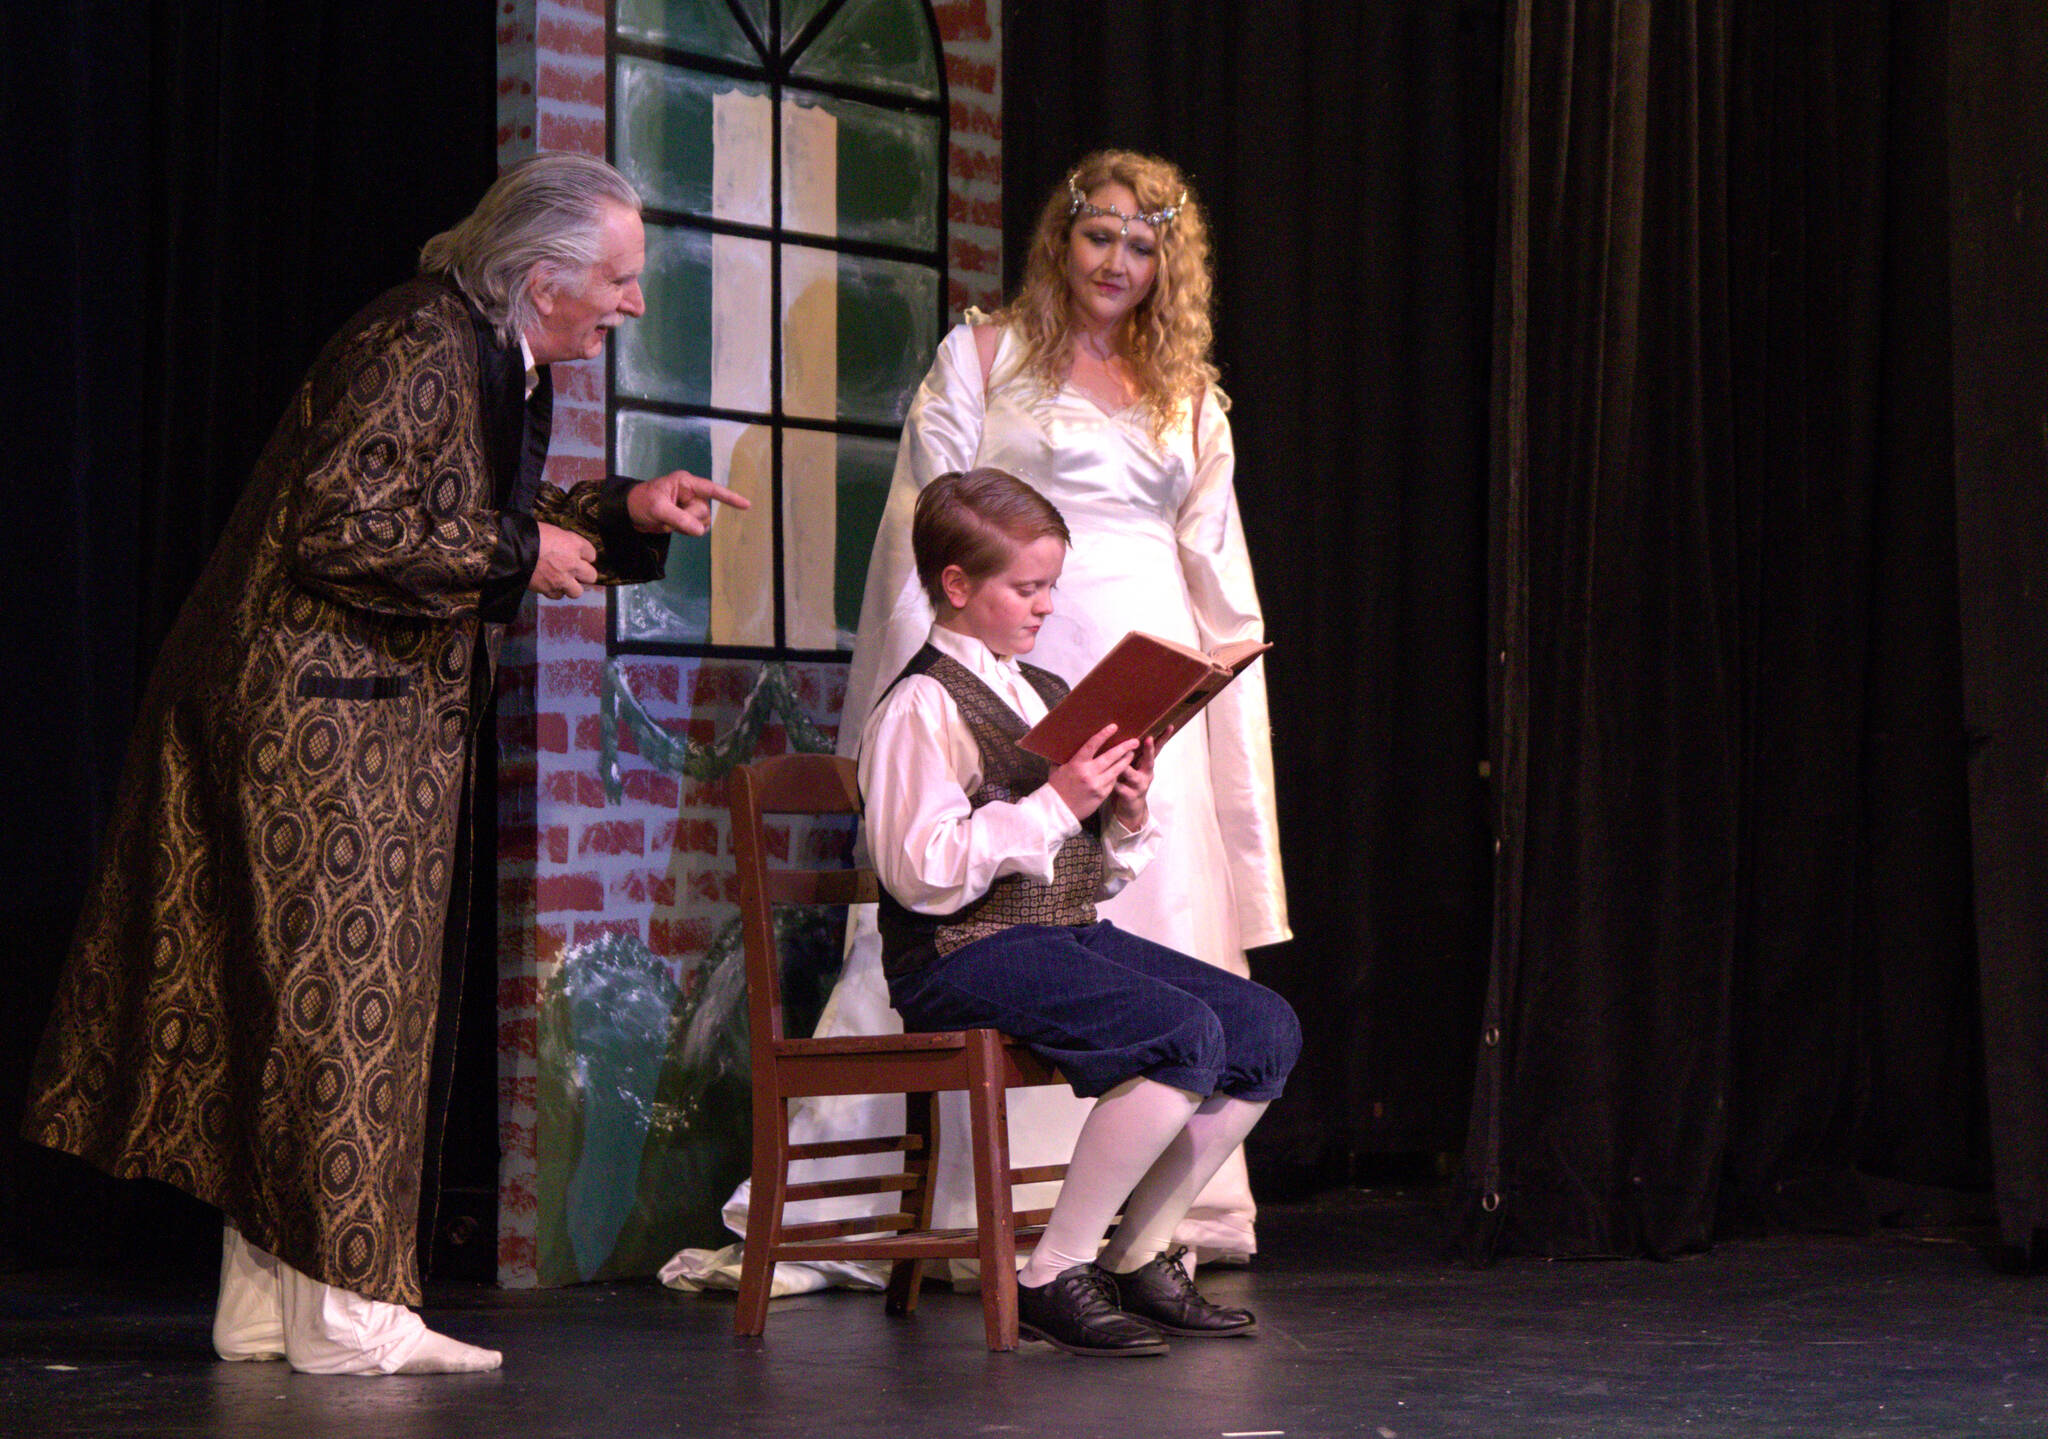 The Ghost of Christmas Past (Amy Jones) takes Scrooge (Ben Honeycutt) back to his childhood. (Photo by Luisa Loi)